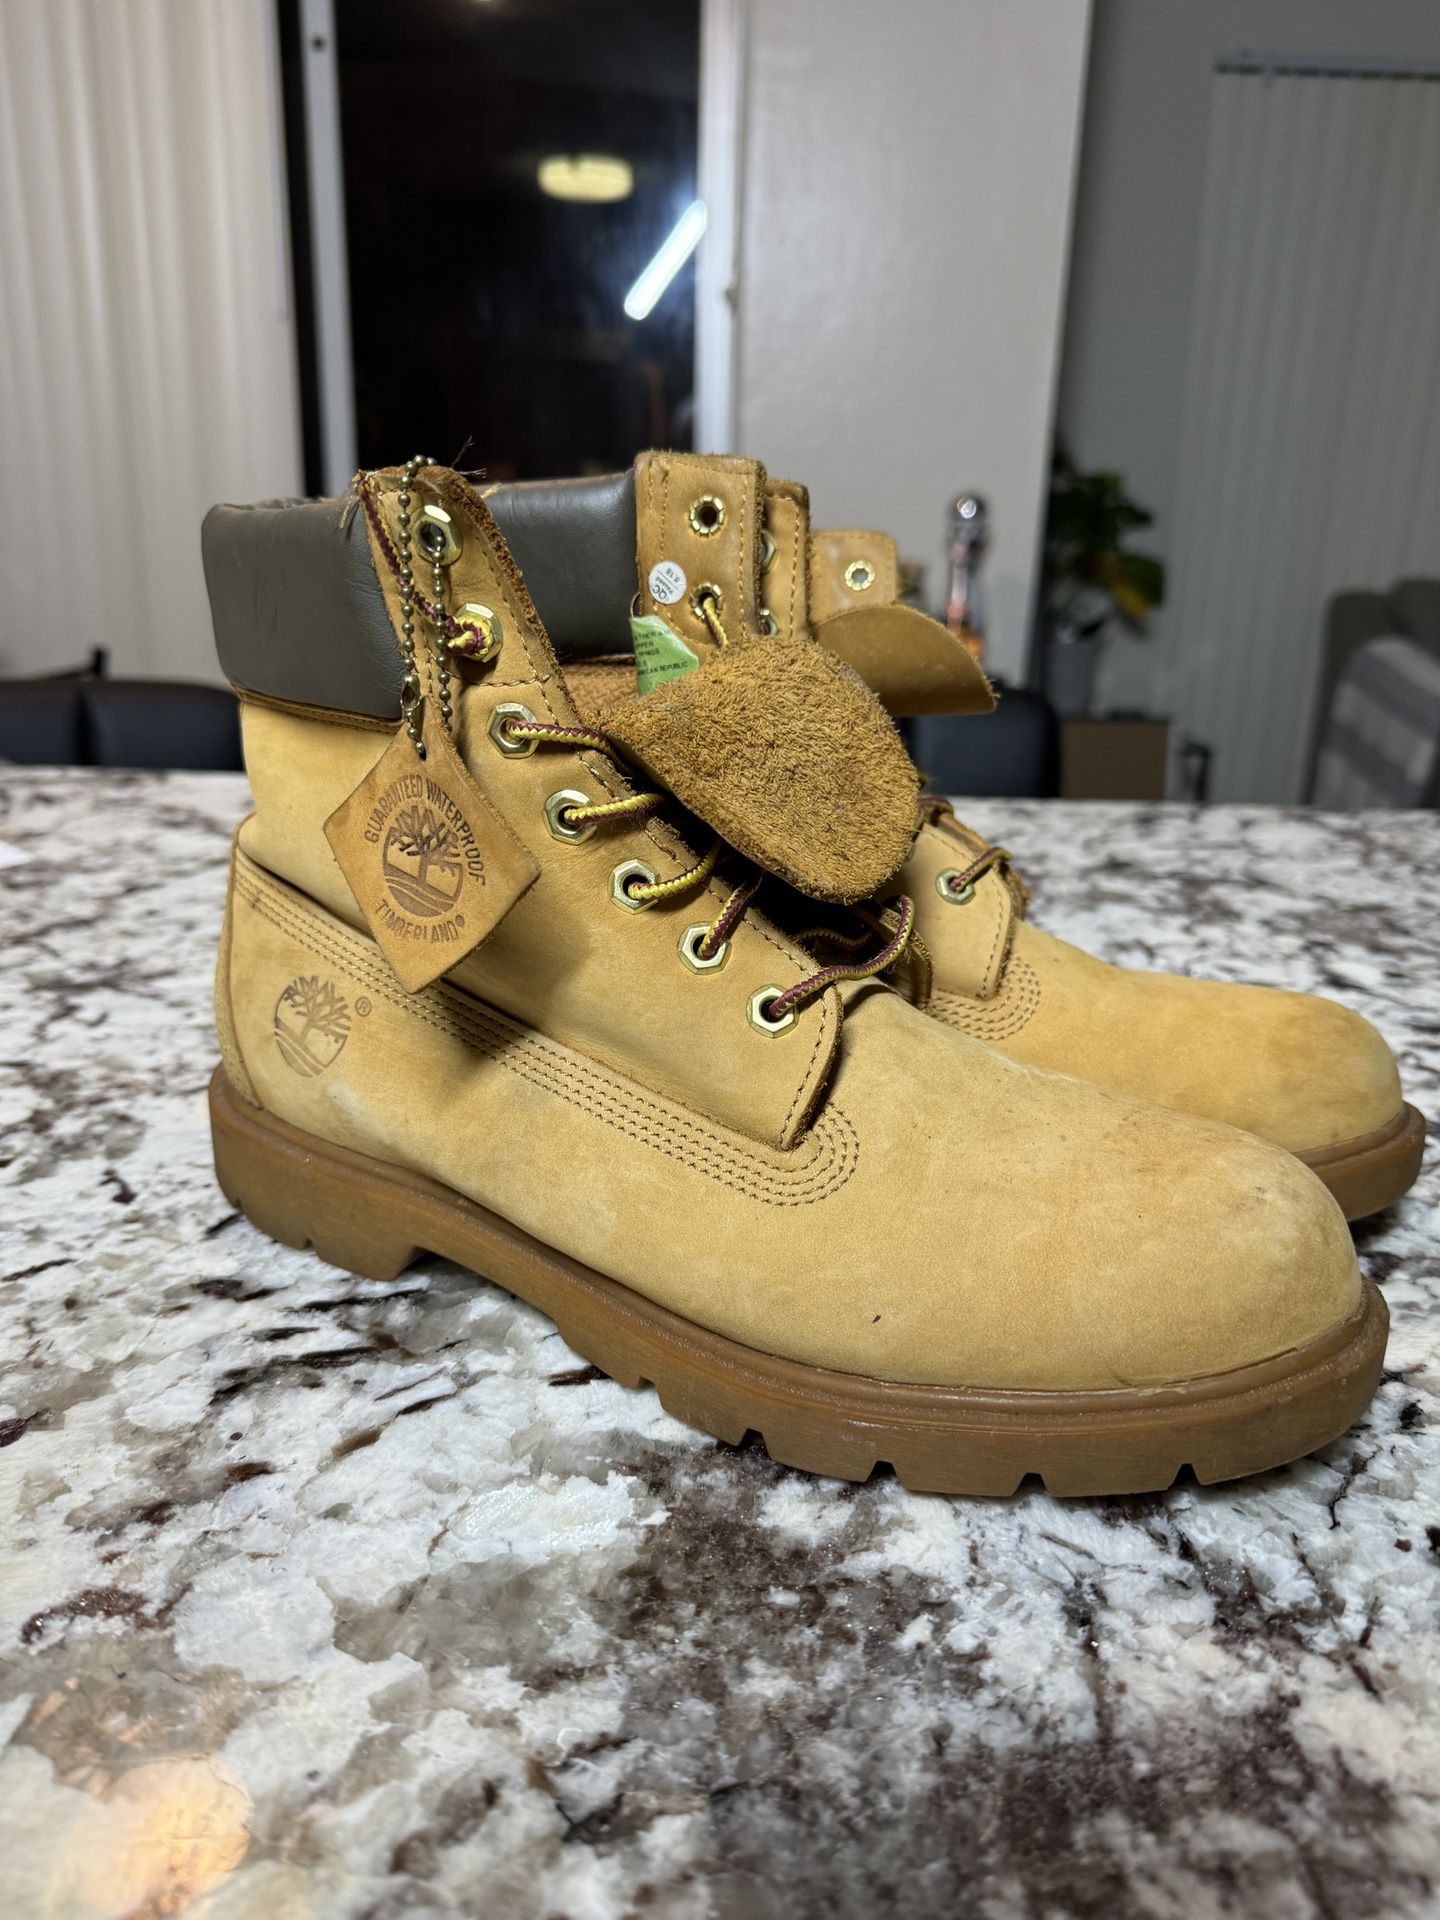 timbs size 9.5 M